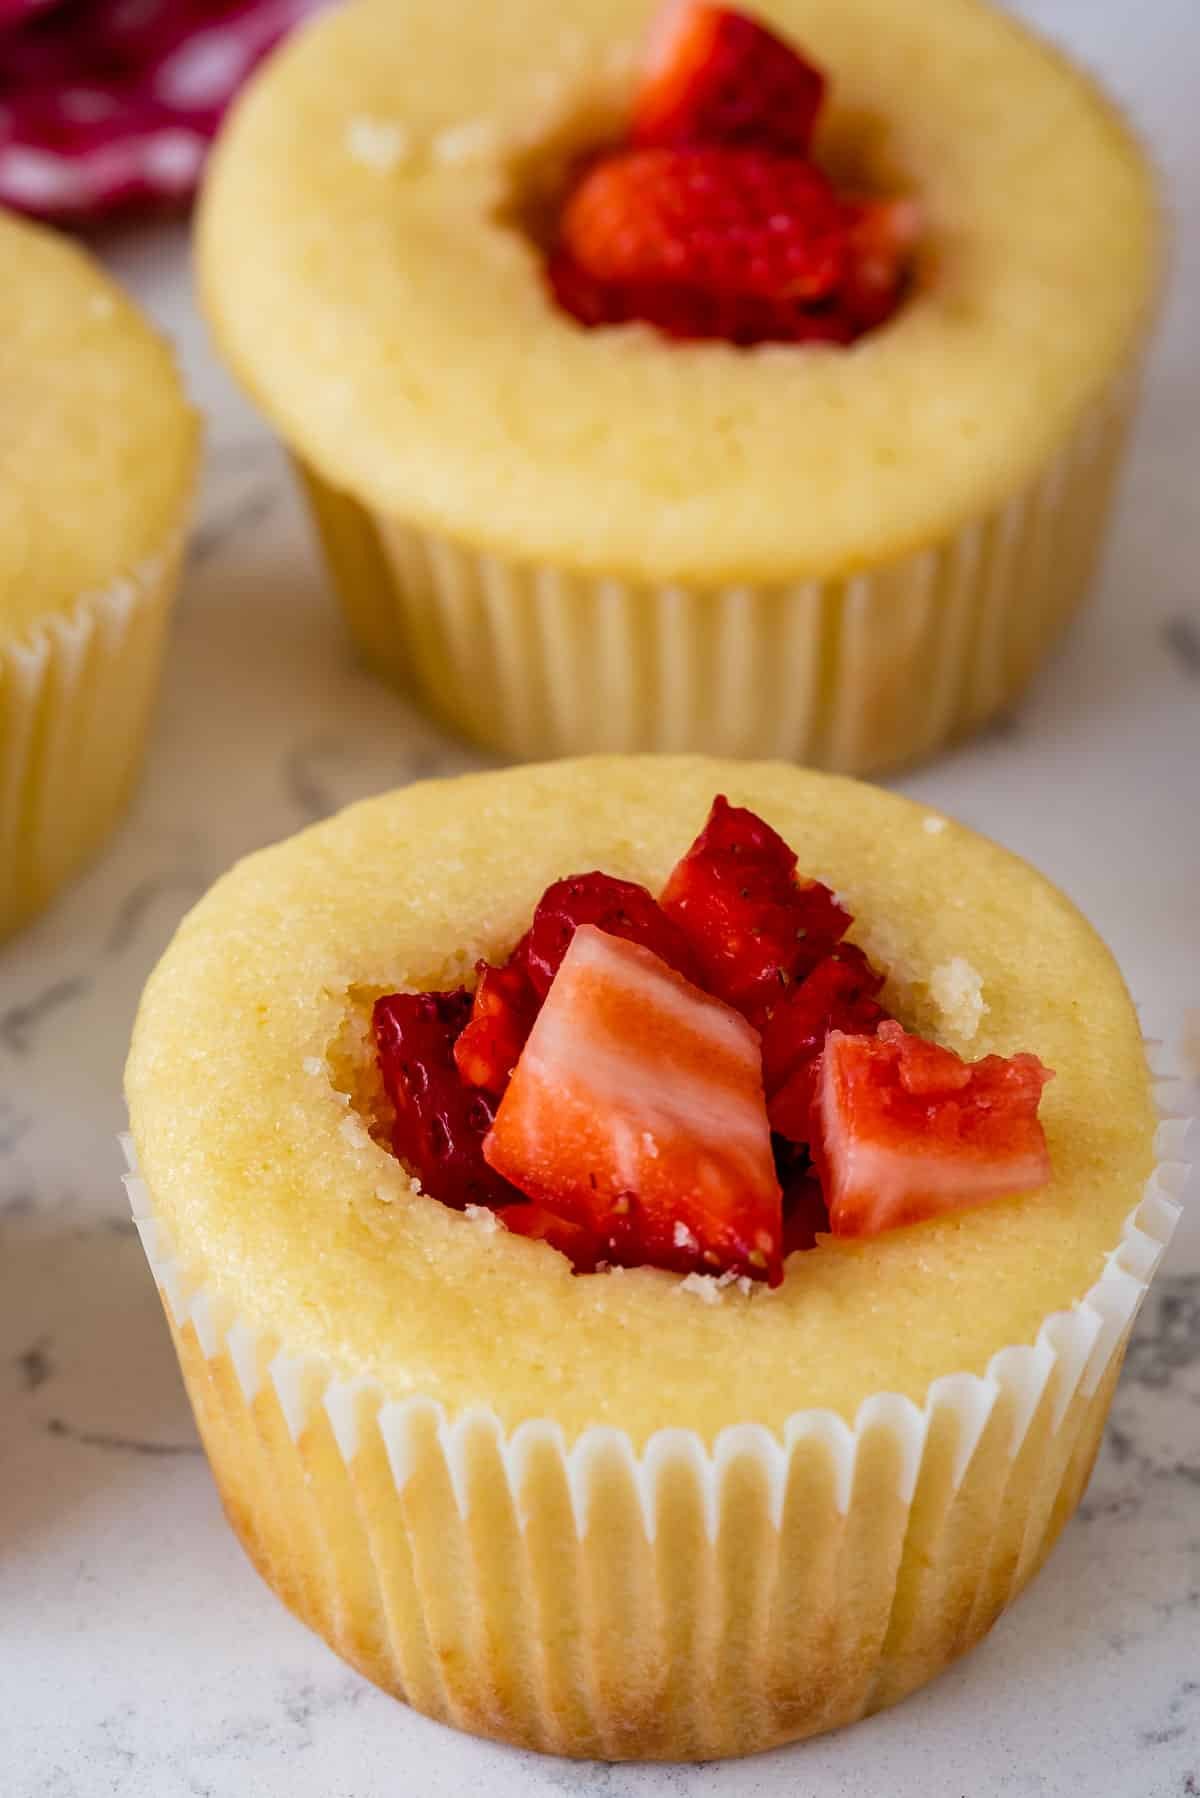 cupcakes with chopped strawberries in the center.